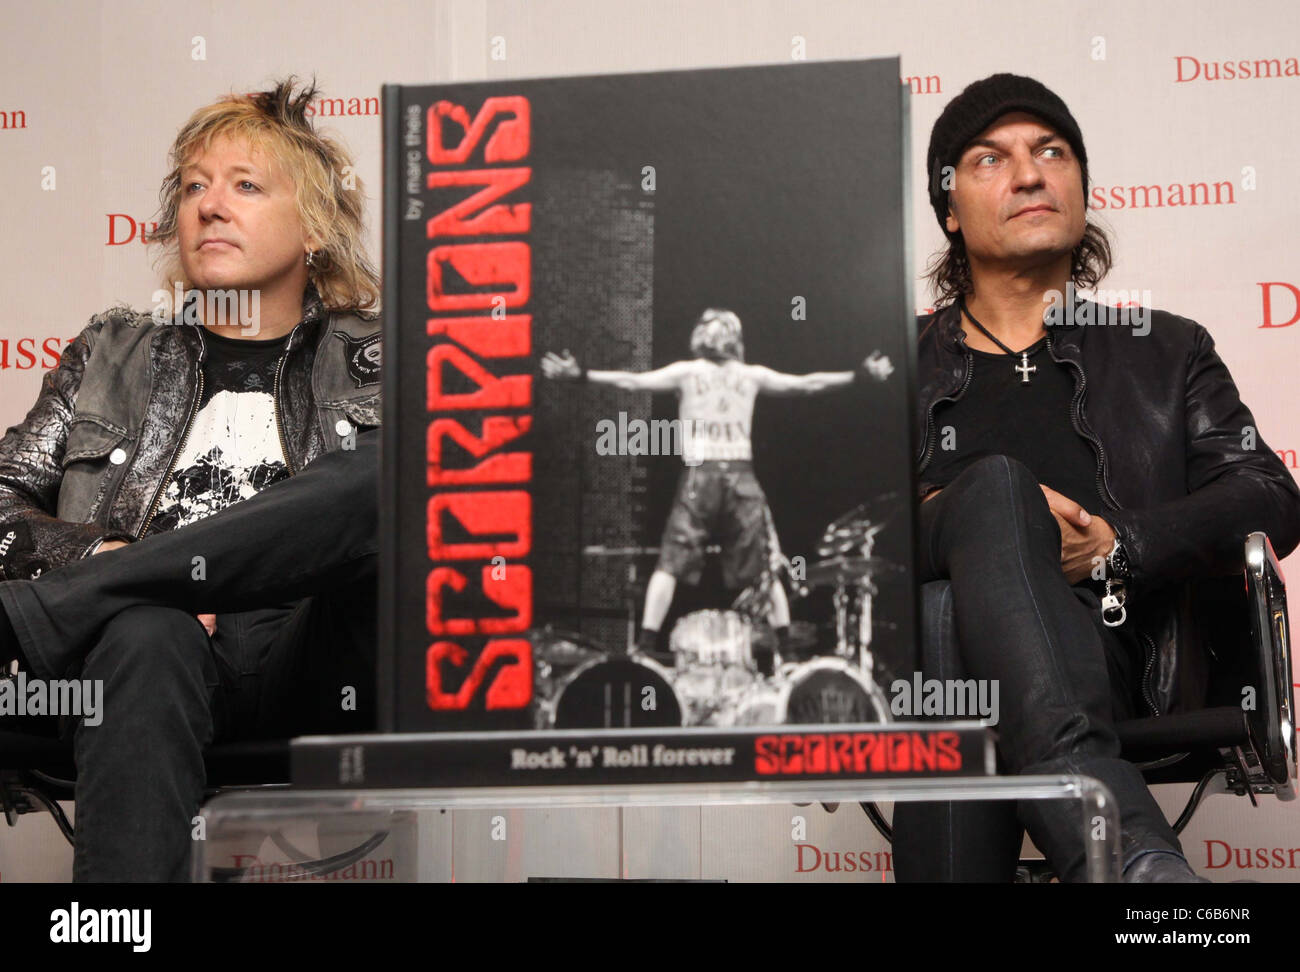 James Kottak and Matthias Jabs at the launch of the book 'Rock'n'Roll Forever - Scorpions' at Dussmann Kulturkaufhaus book Stock Photo